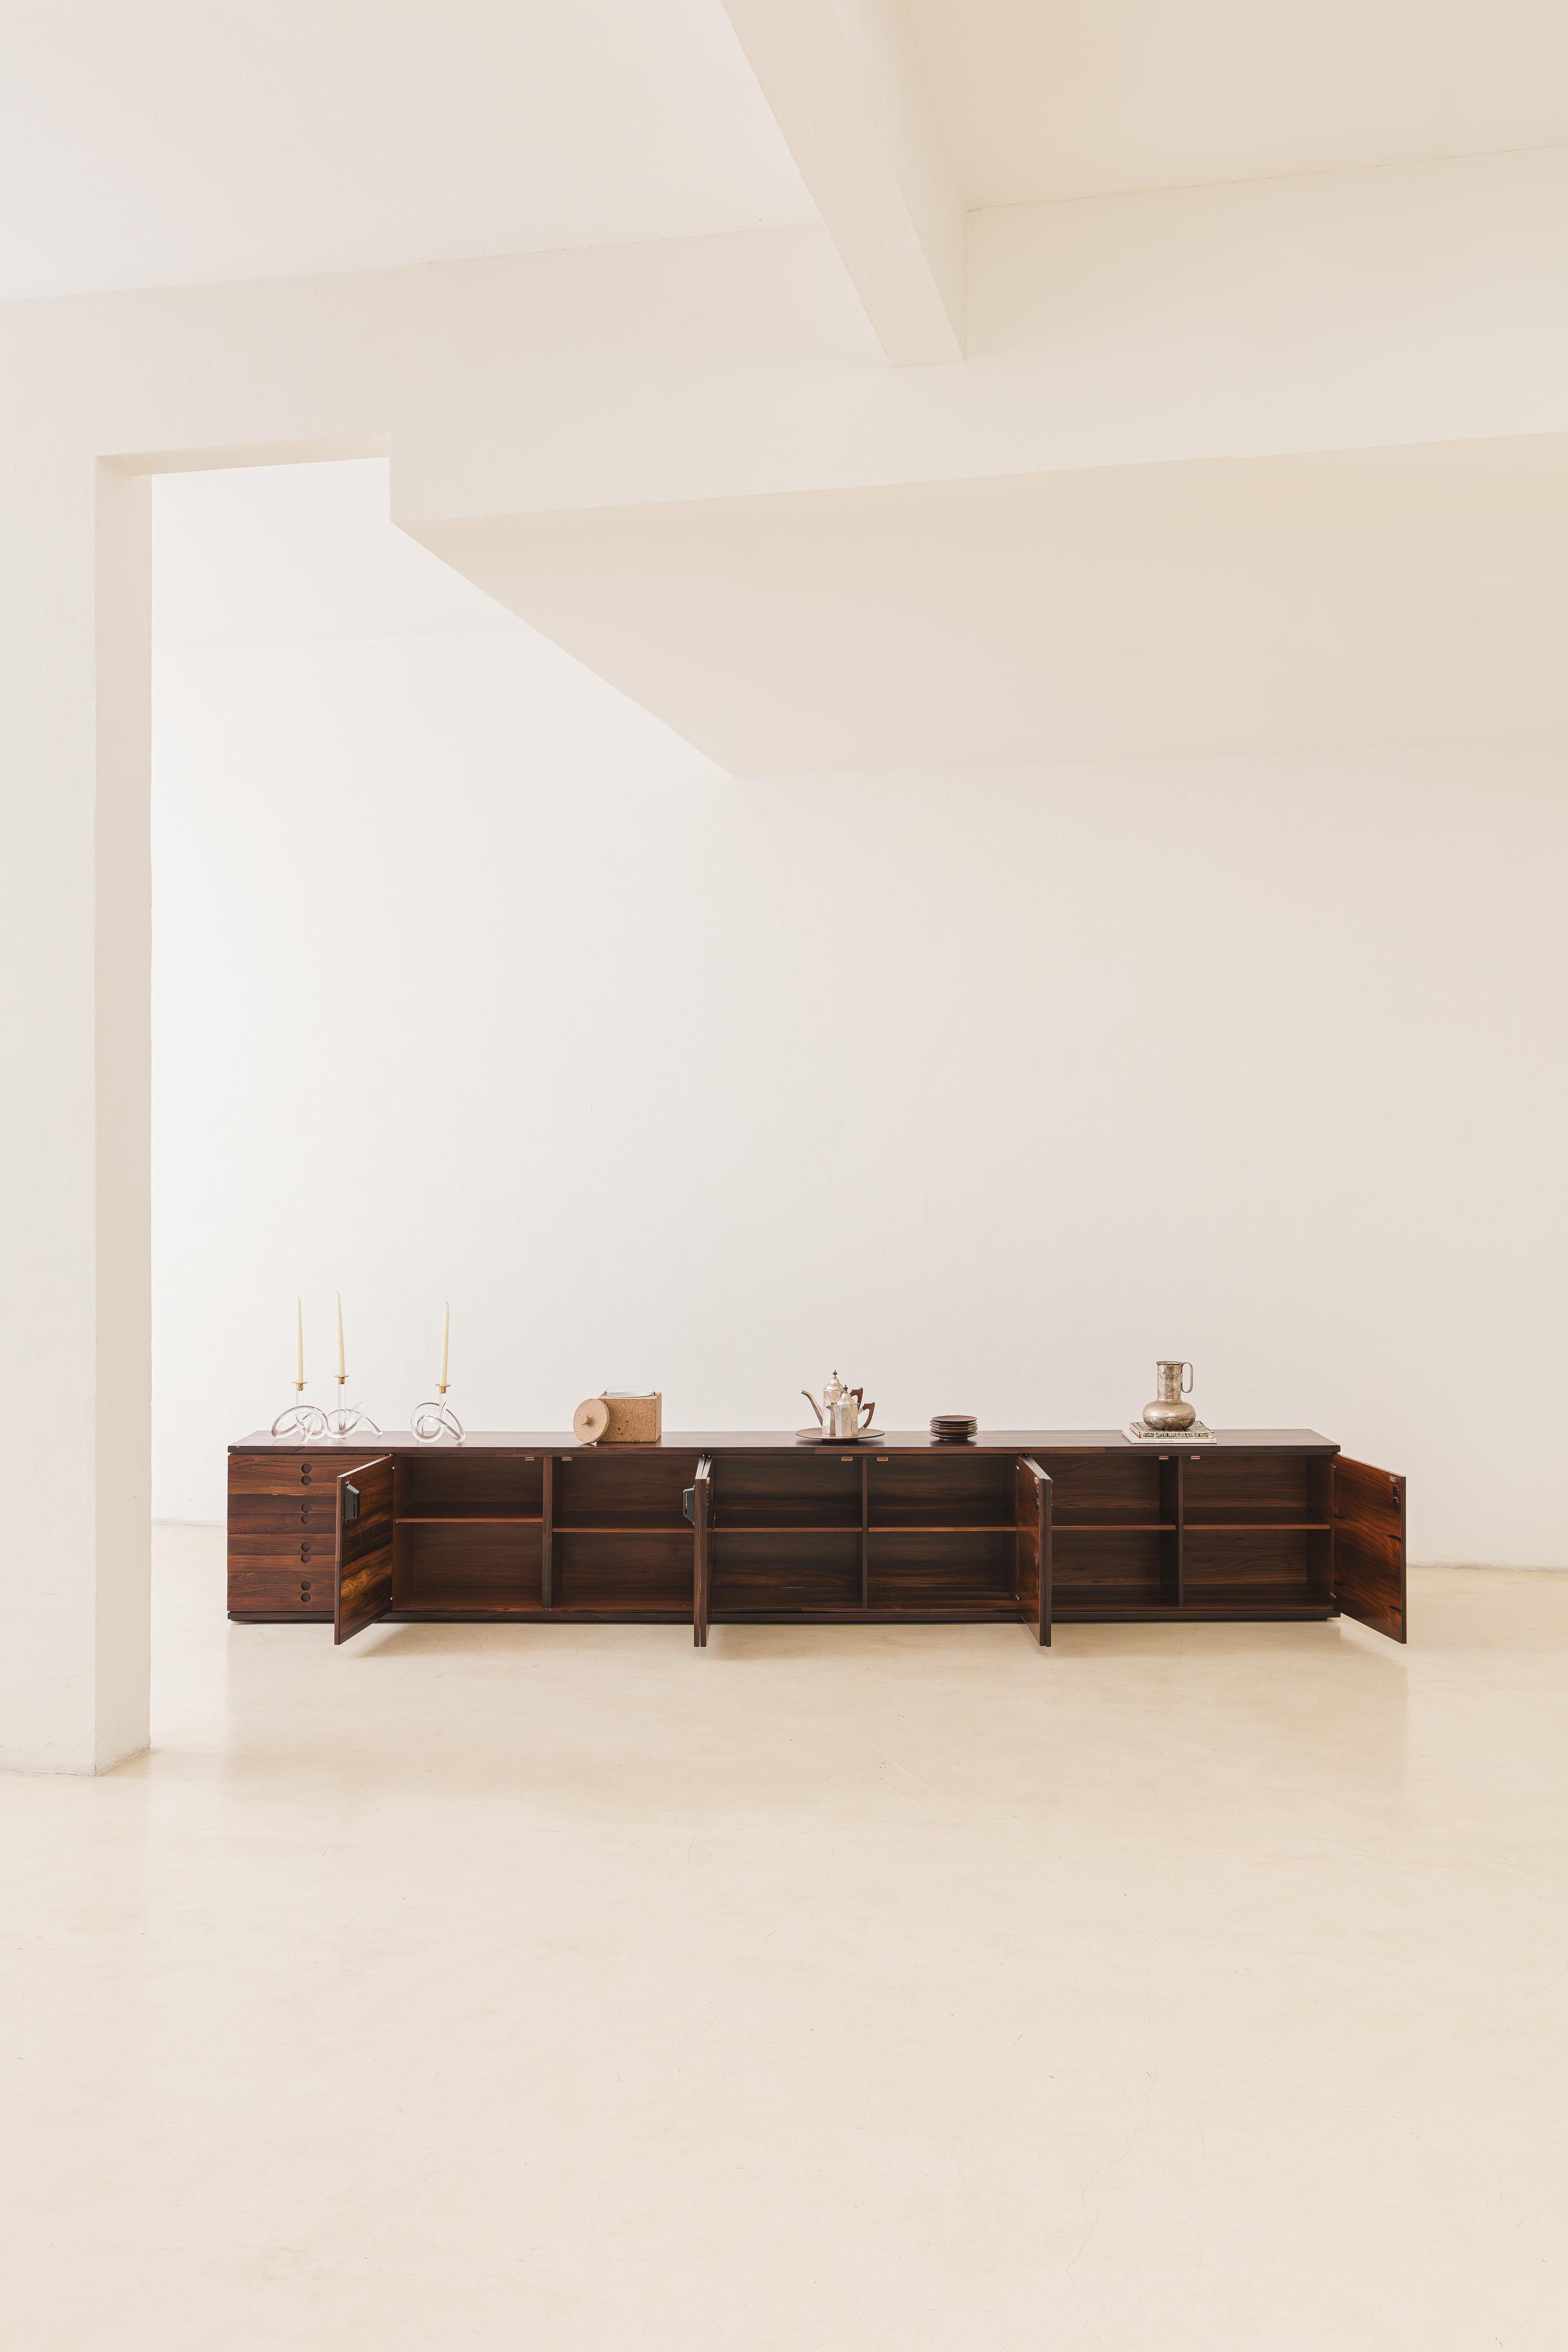 Mid-20th Century Jorge Zalszupin Modulated Units Sideboard, Rosewood,  Brazilian Design, 1960s. For Sale